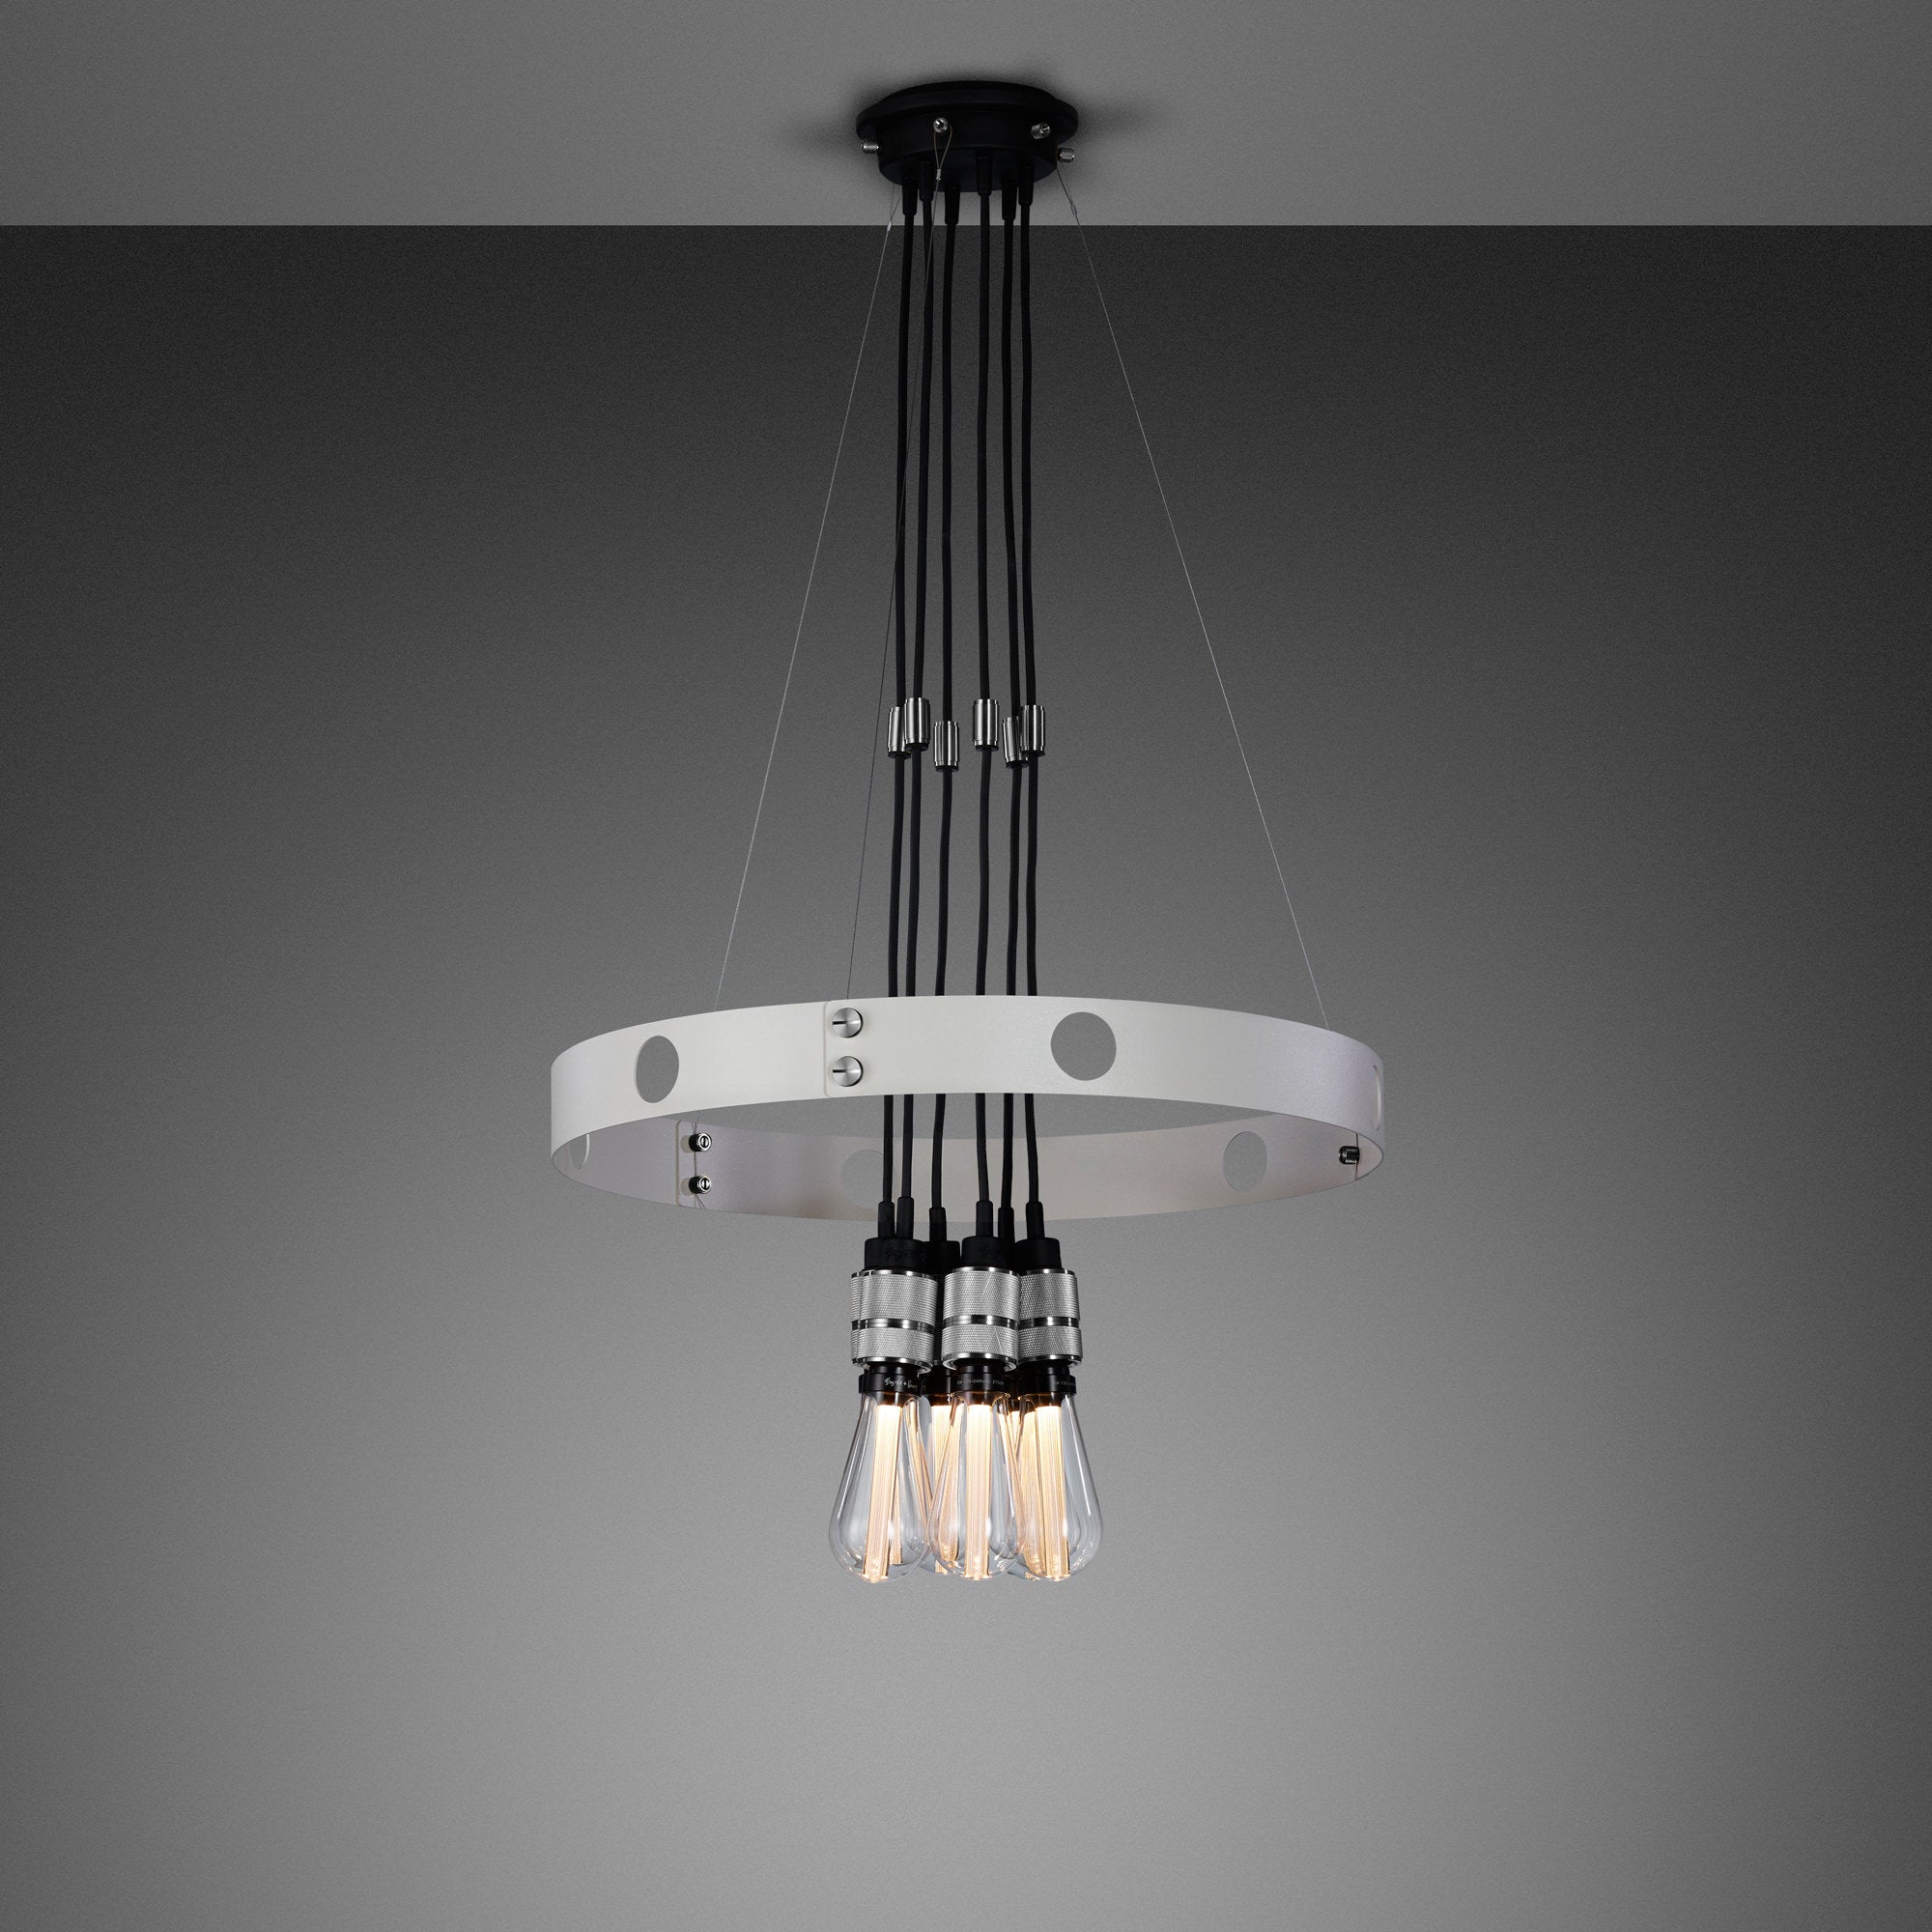 Buster + Punch Hero Light US-HE6 Chandelier Buster + Punch Stone / Steel 30" 